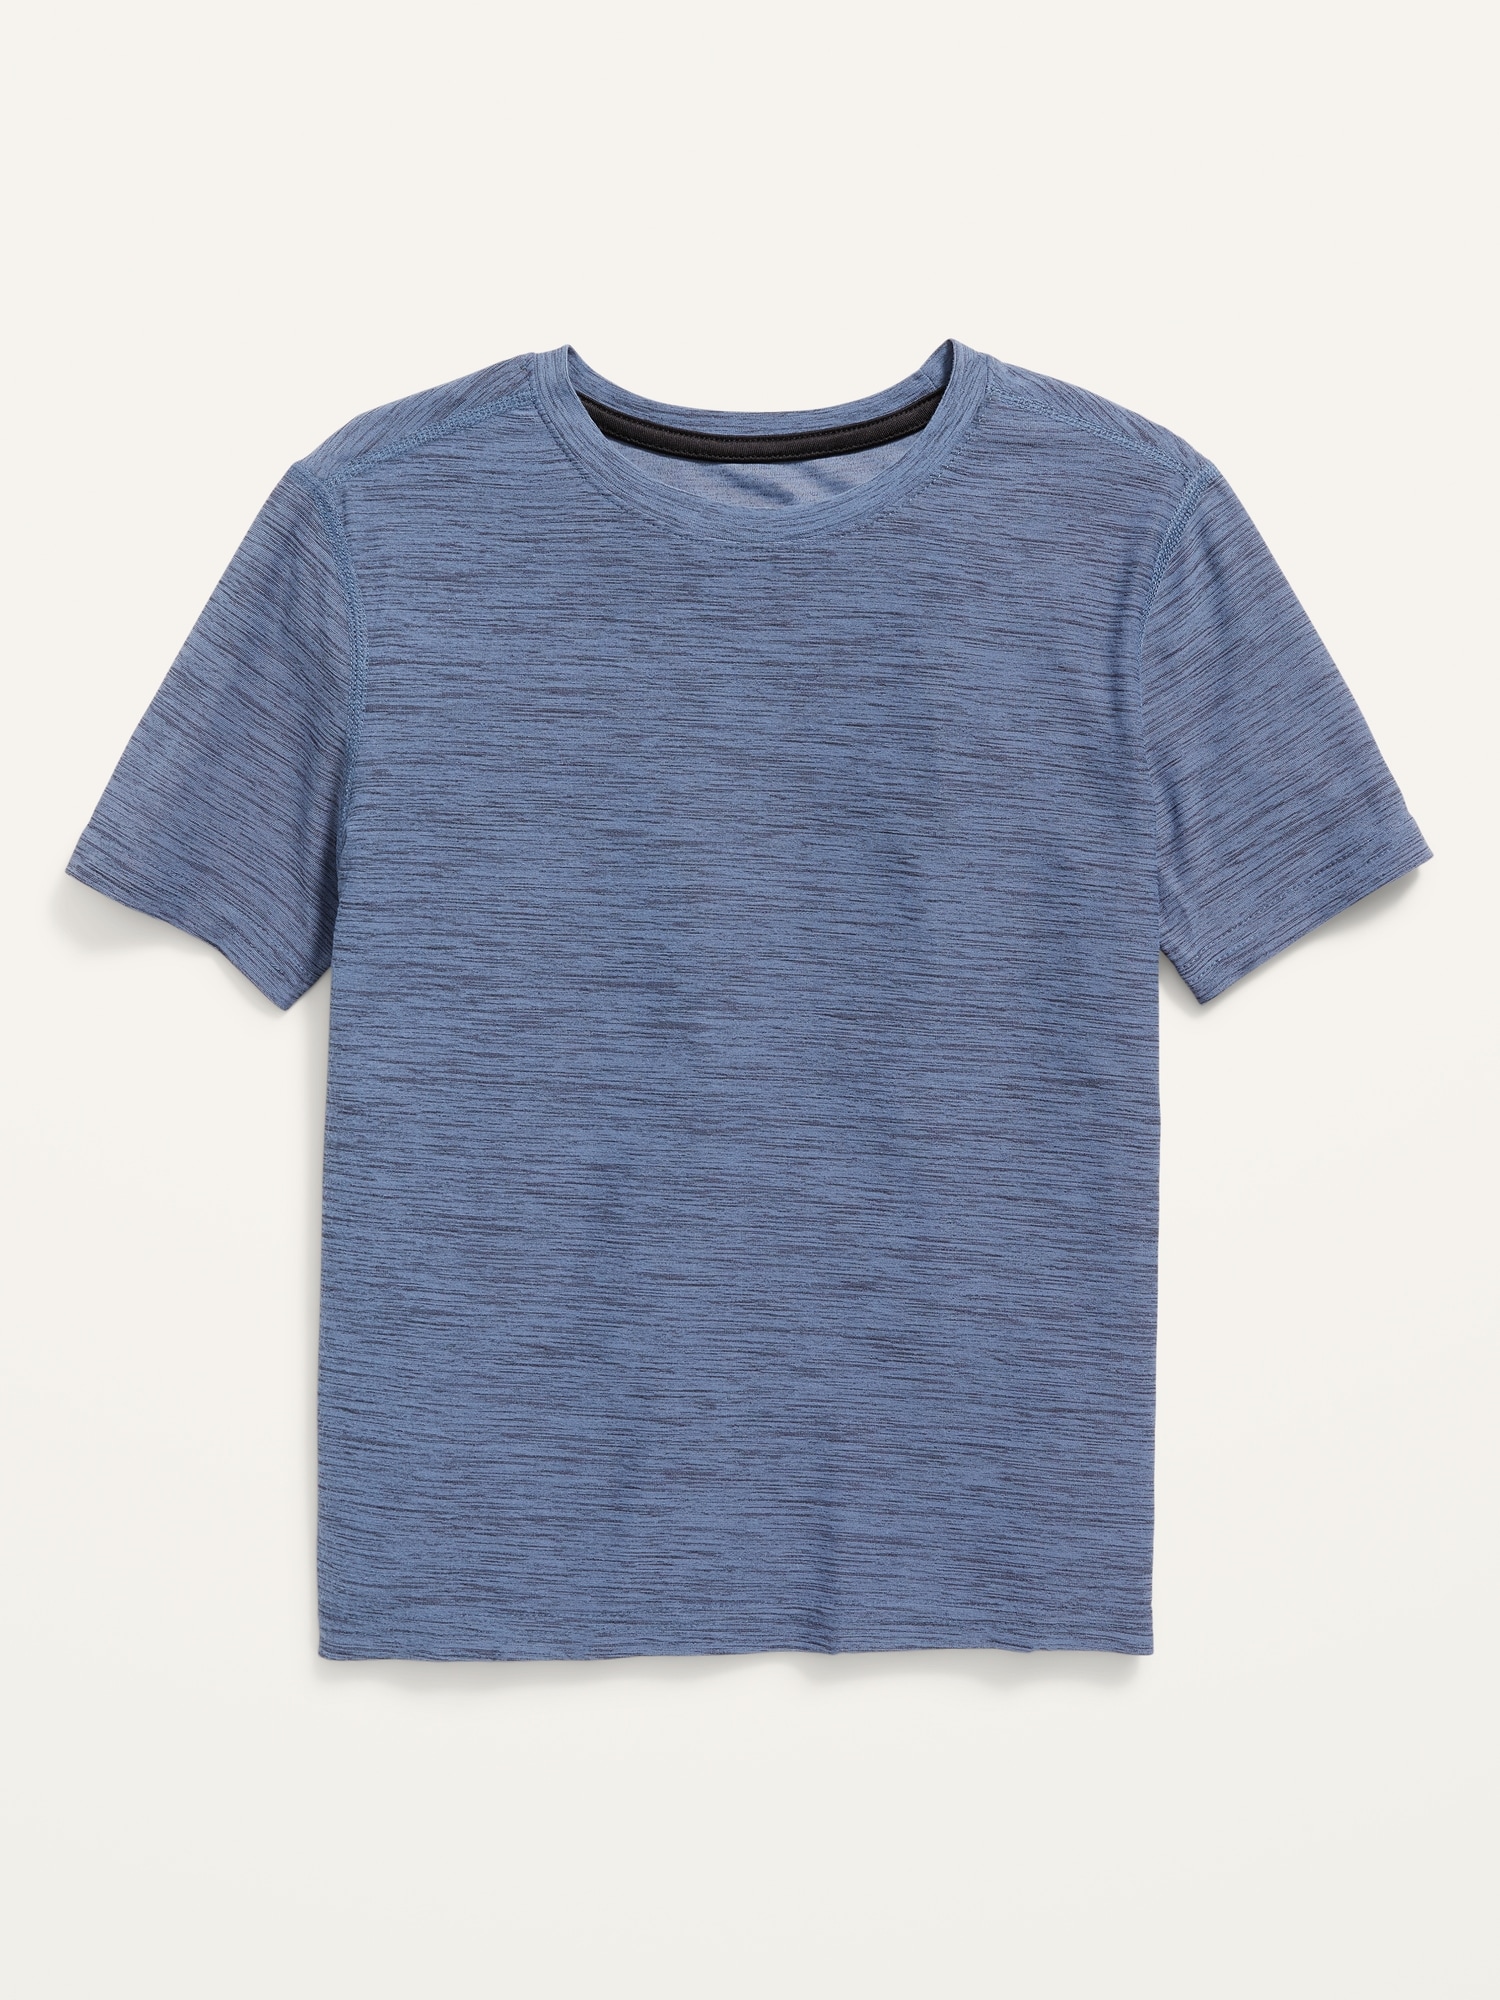 Old Navy Breathe ON Performance T-Shirt for Boys blue. 1